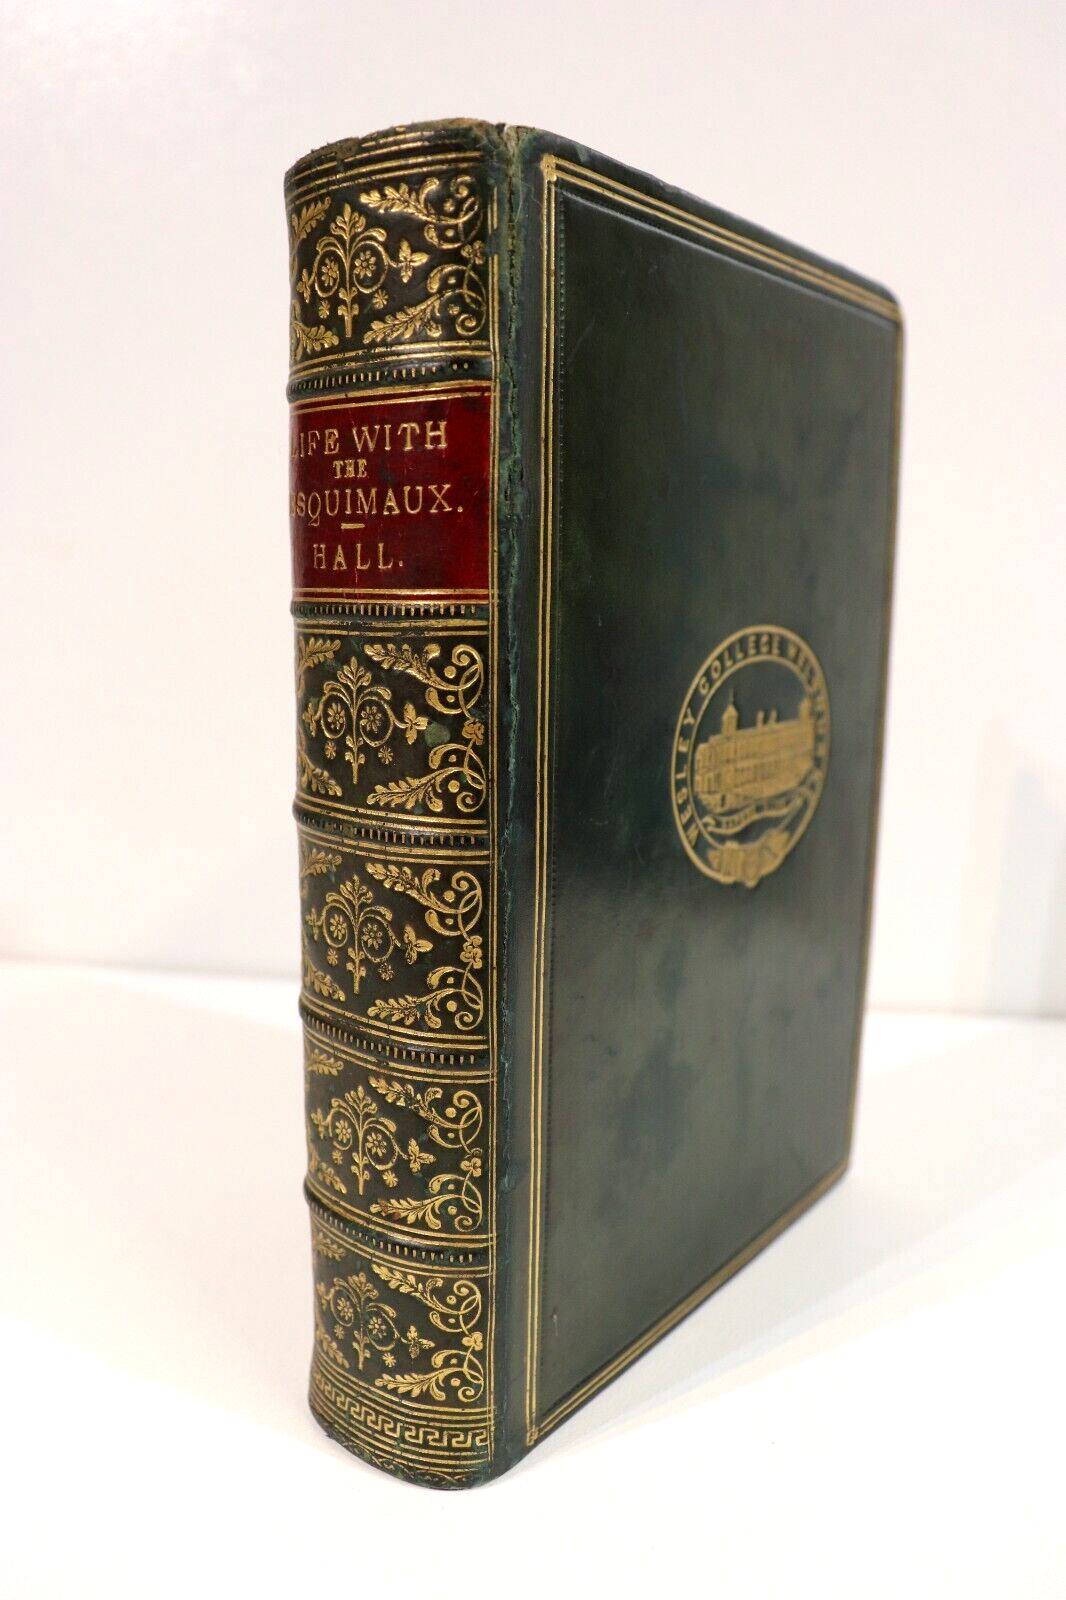 1865 Life With The Esquimaux by Charles F. Hall Antiquarian Exploration Book